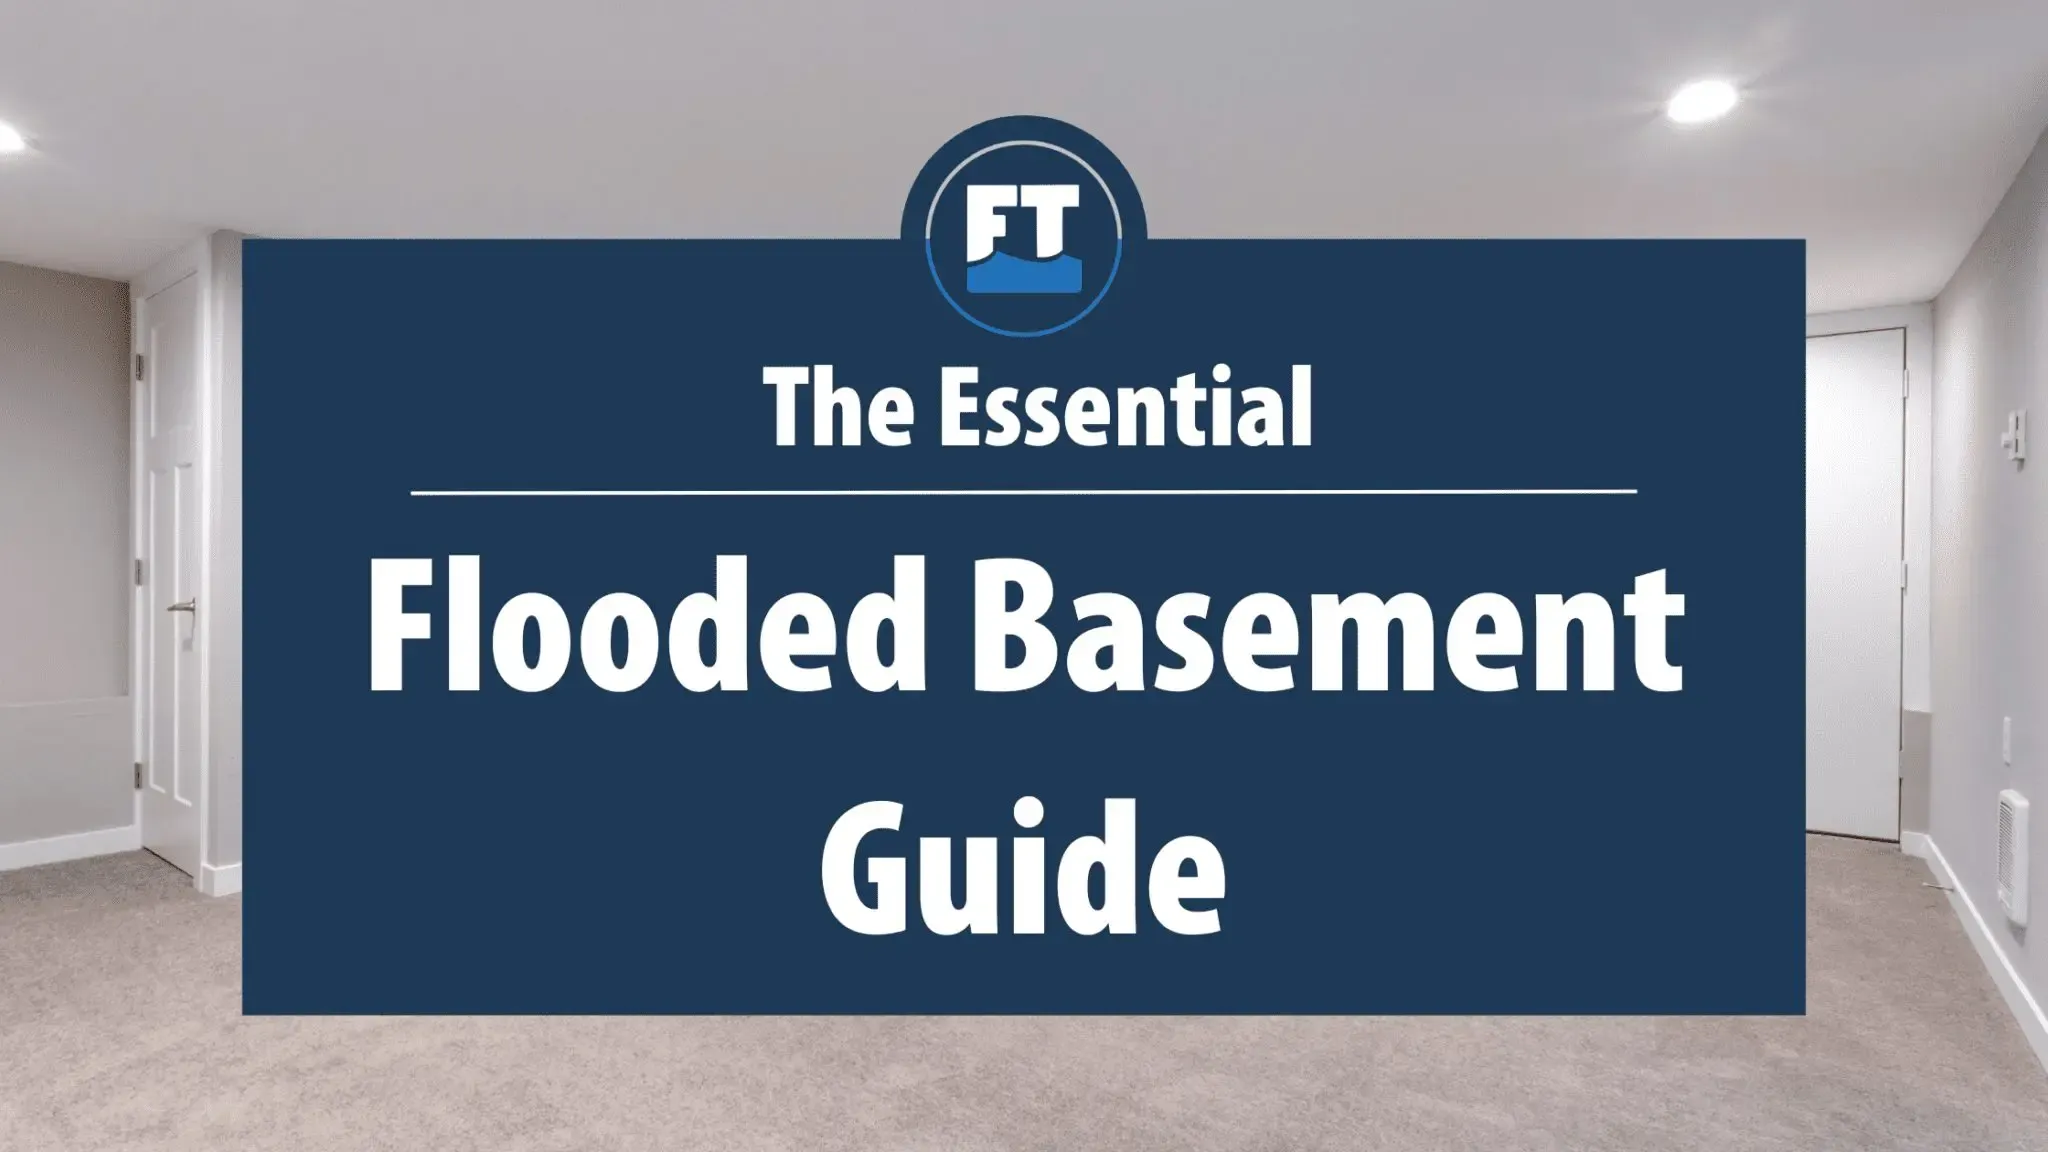 The Essential Flooded Basement Guide